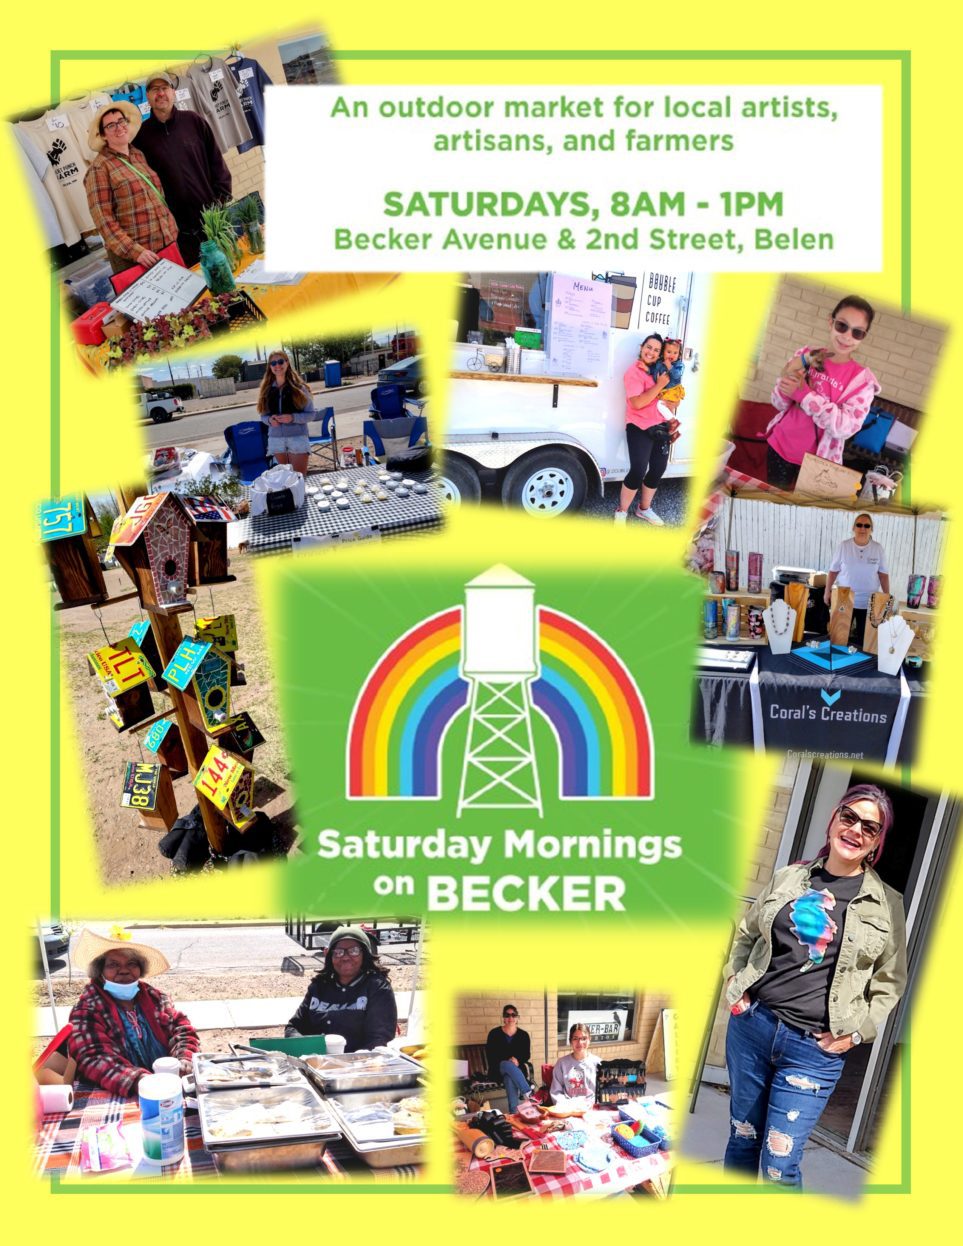 Saturday Mornings on Becker Ave. An outdoor market every Saturday from 8am until 1 pm for local artists, artisans, and farmers.